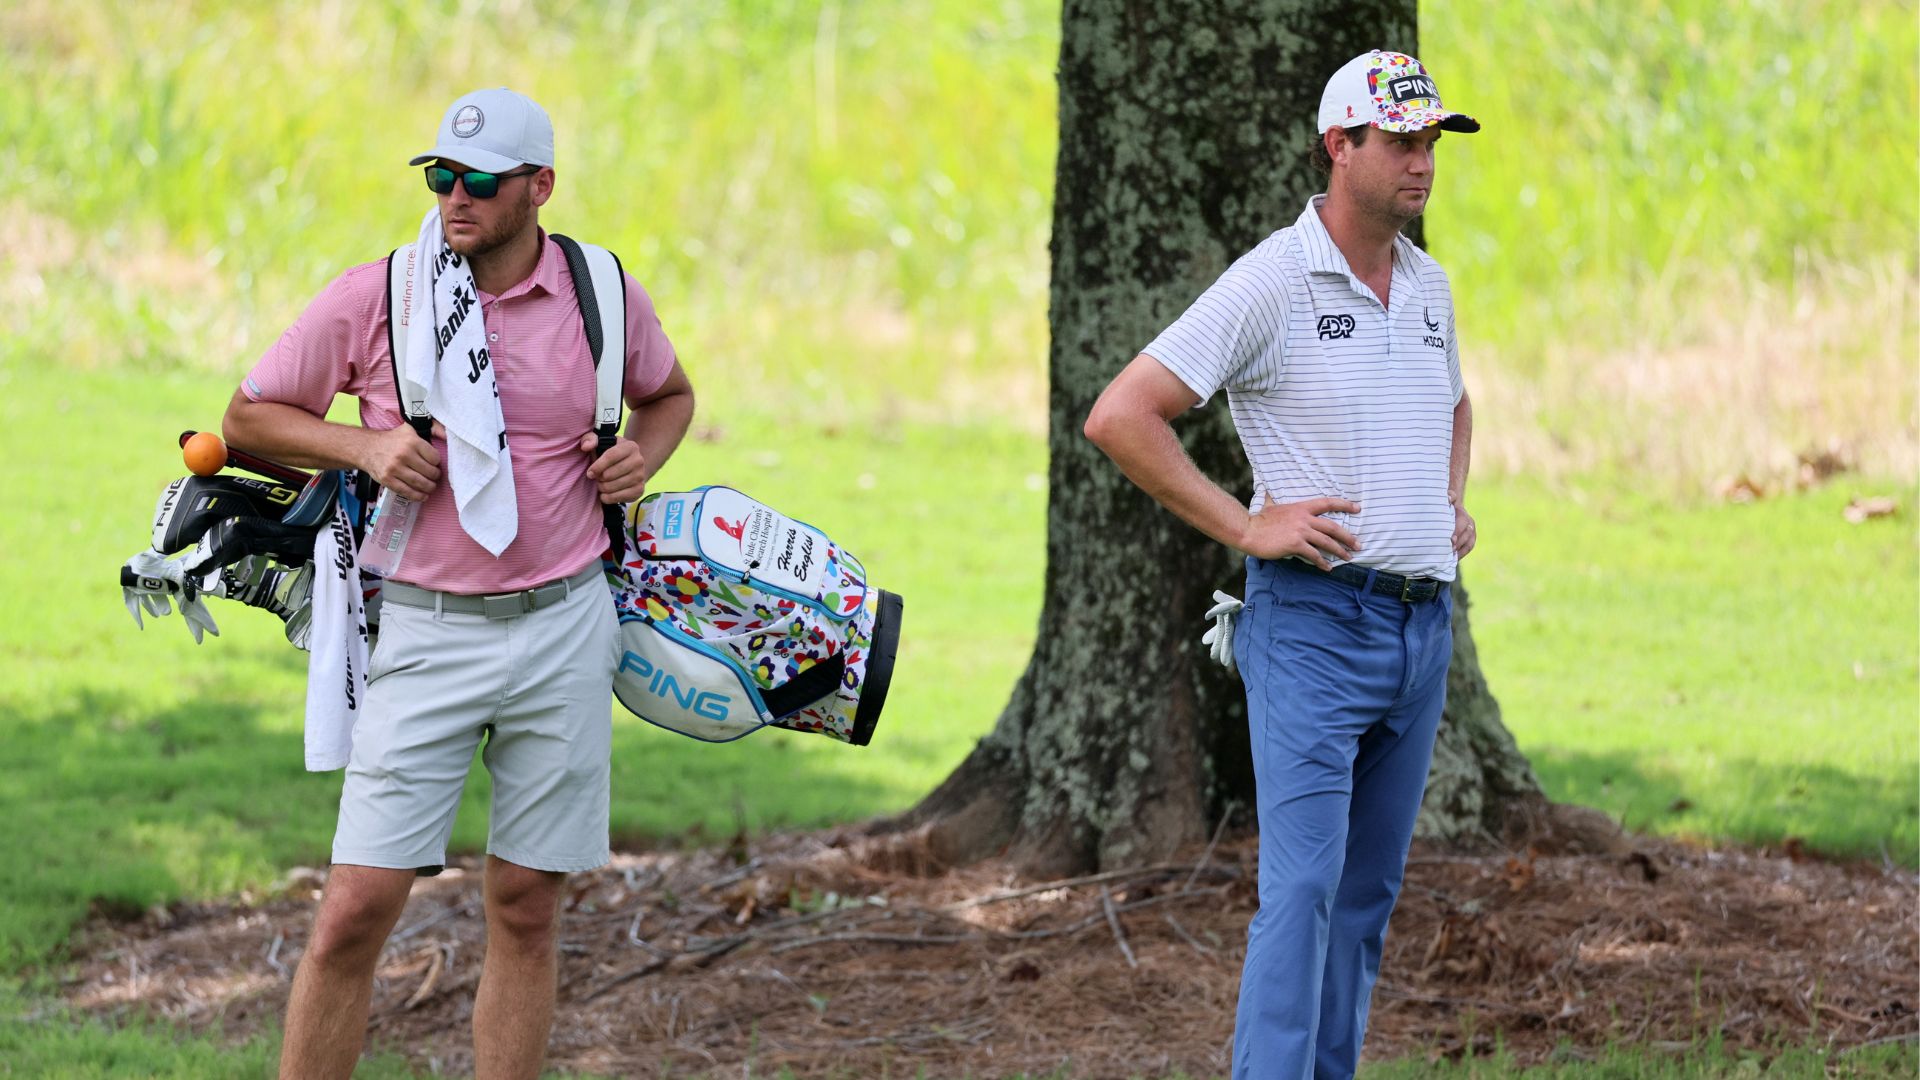 Intense heat at TPC Southwind sets season record, causes medical attention for caddie